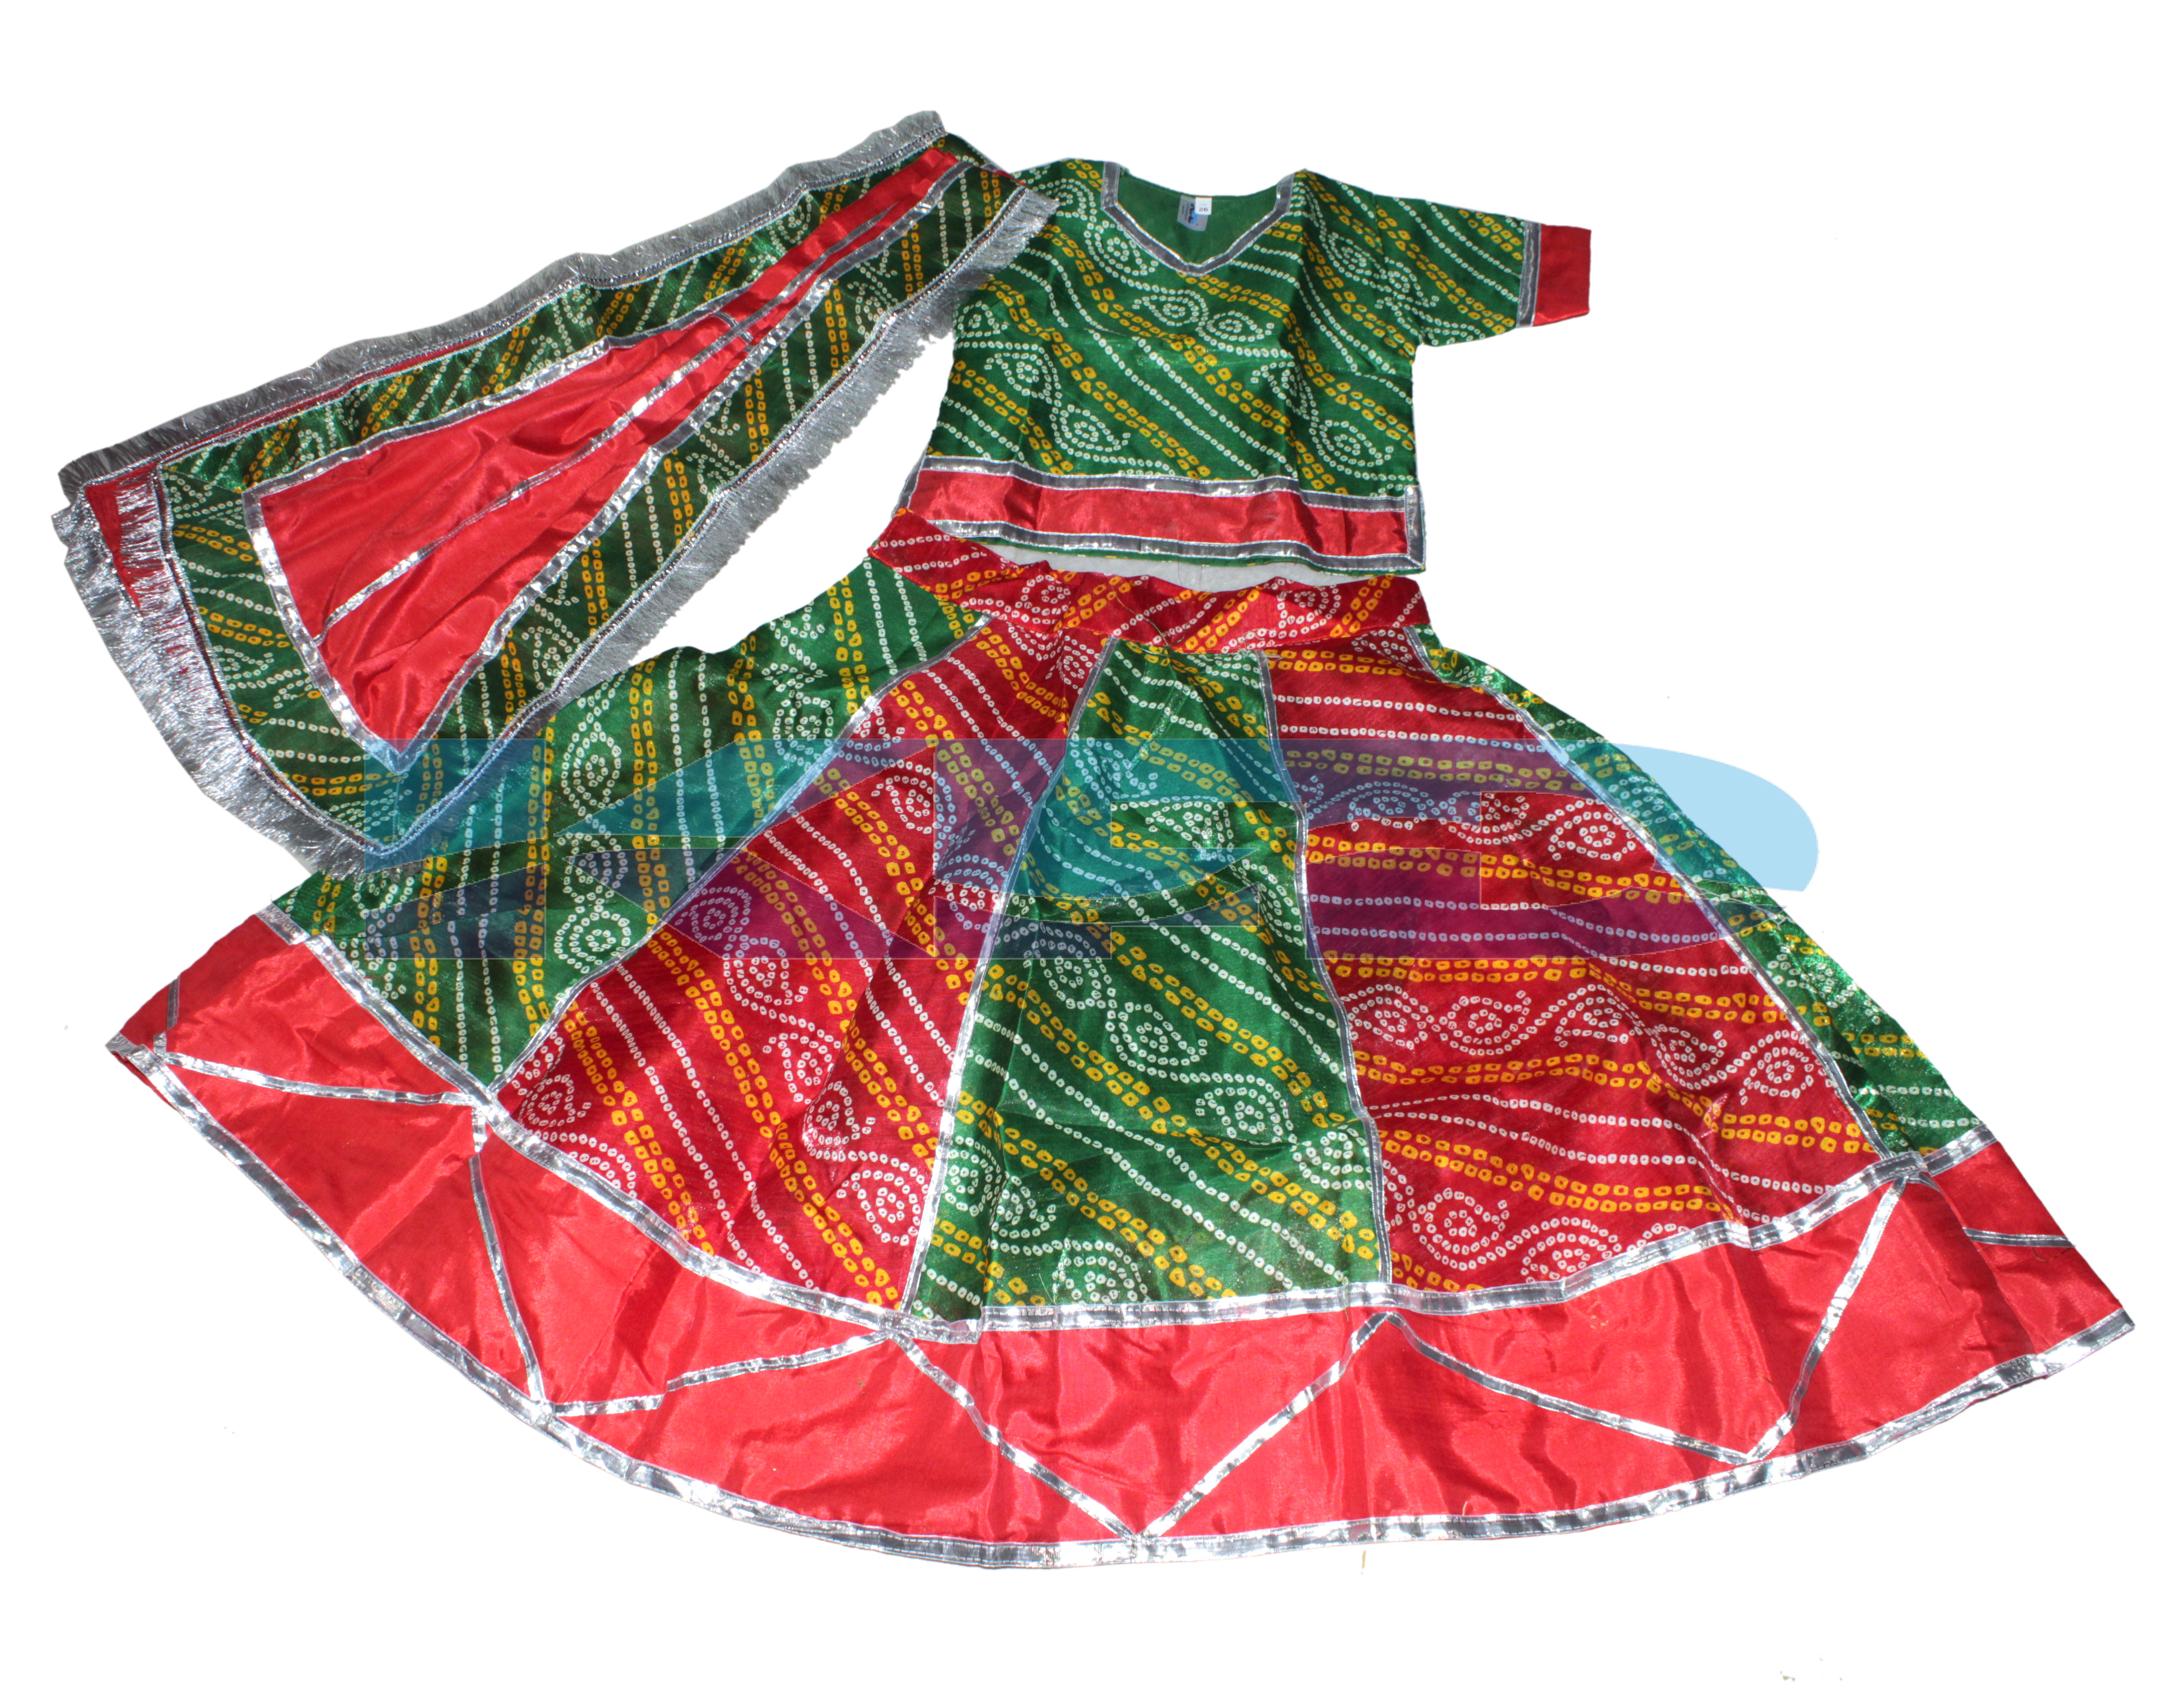 Radha/Rajasthani Lehenga fancy dress for kids,Indian State Traditional Wear Costume for Annual function/Theme Party/Competition/Stage Shows/Birthday Party Dress